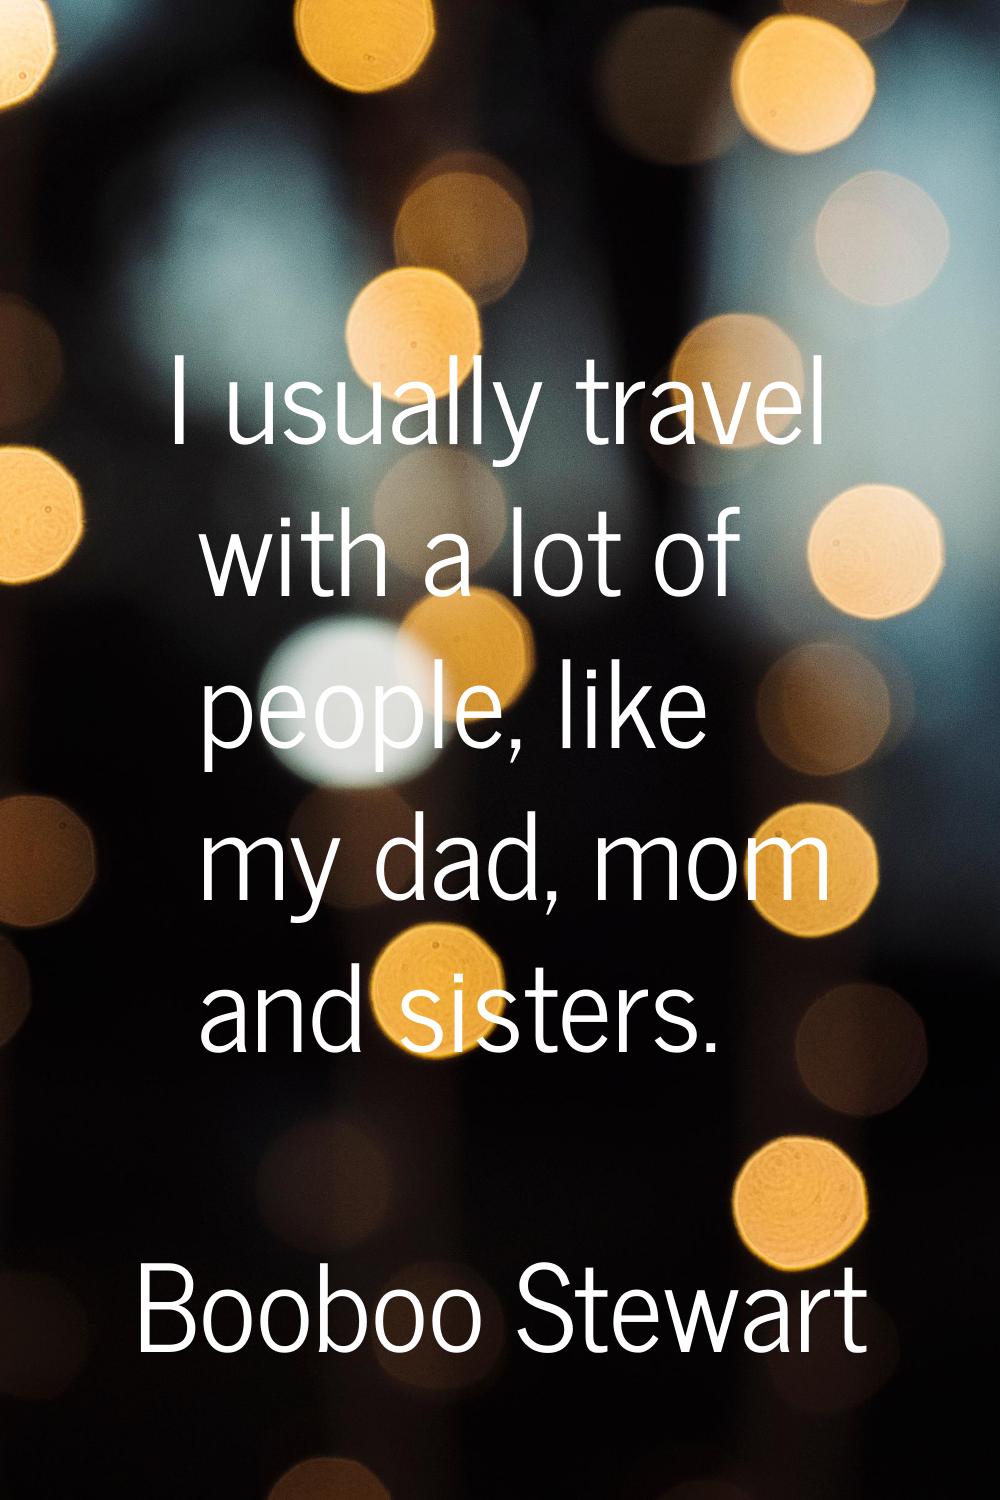 I usually travel with a lot of people, like my dad, mom and sisters.